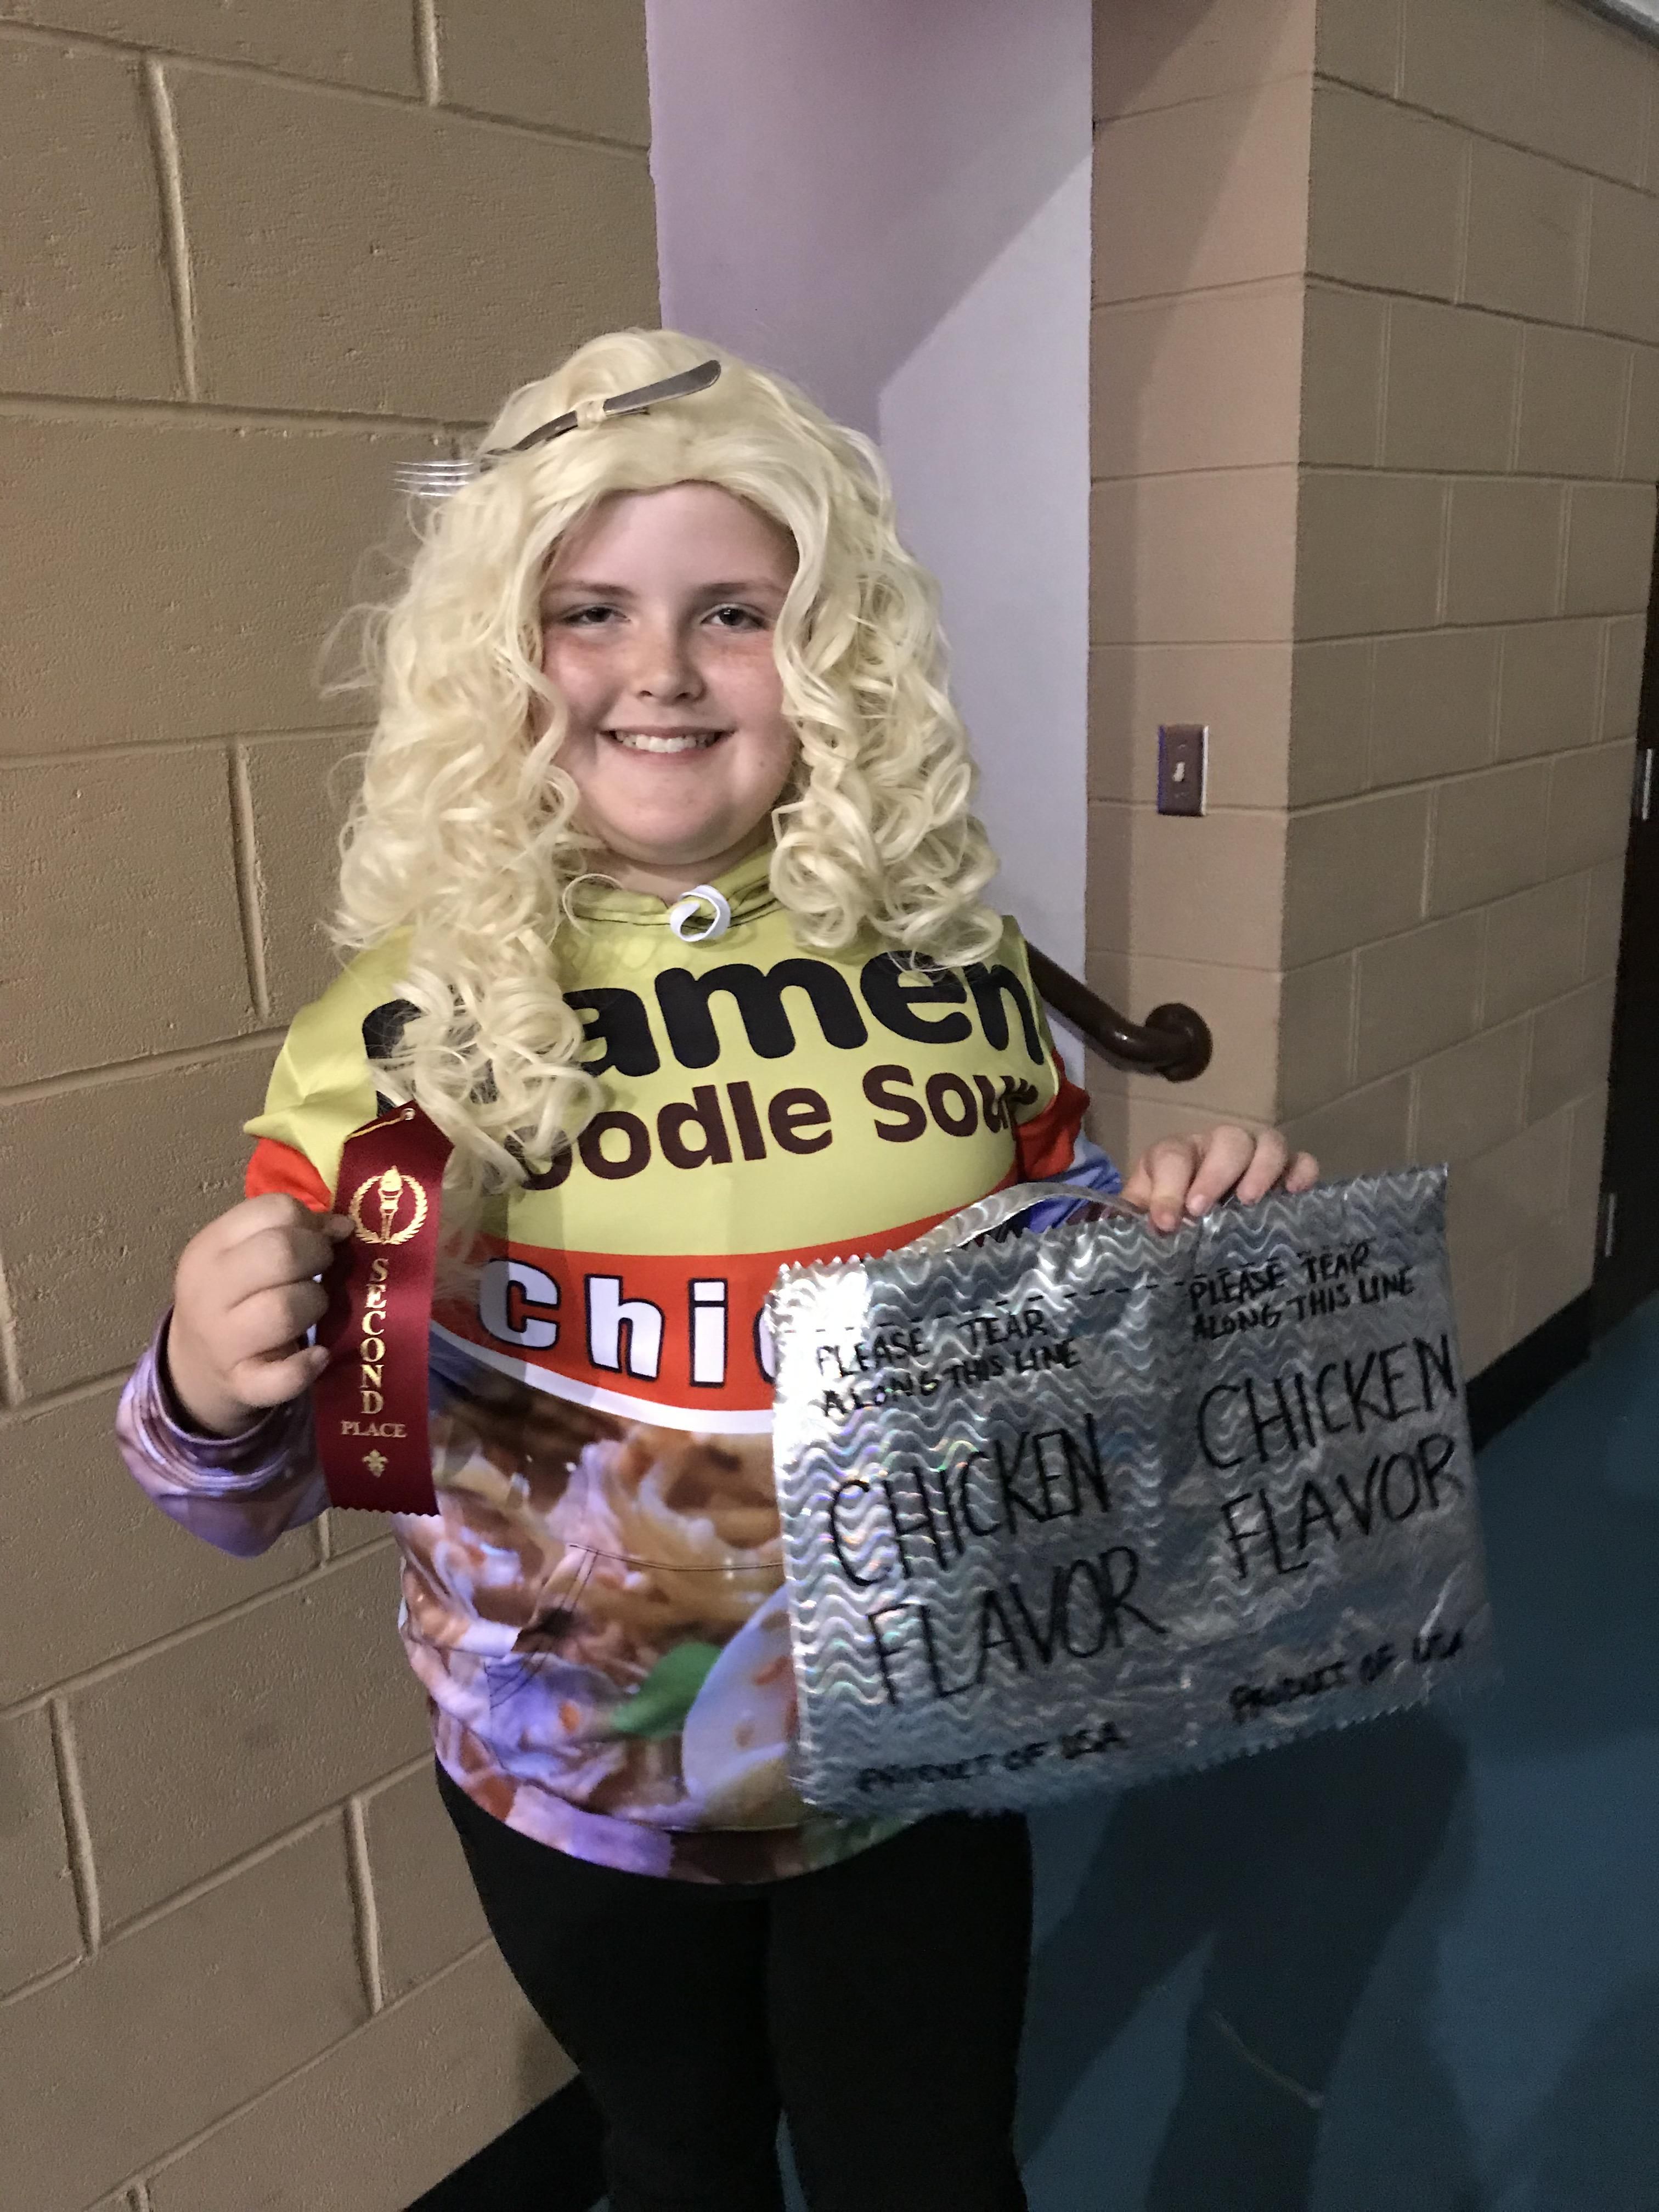 Her most popular costume so far!